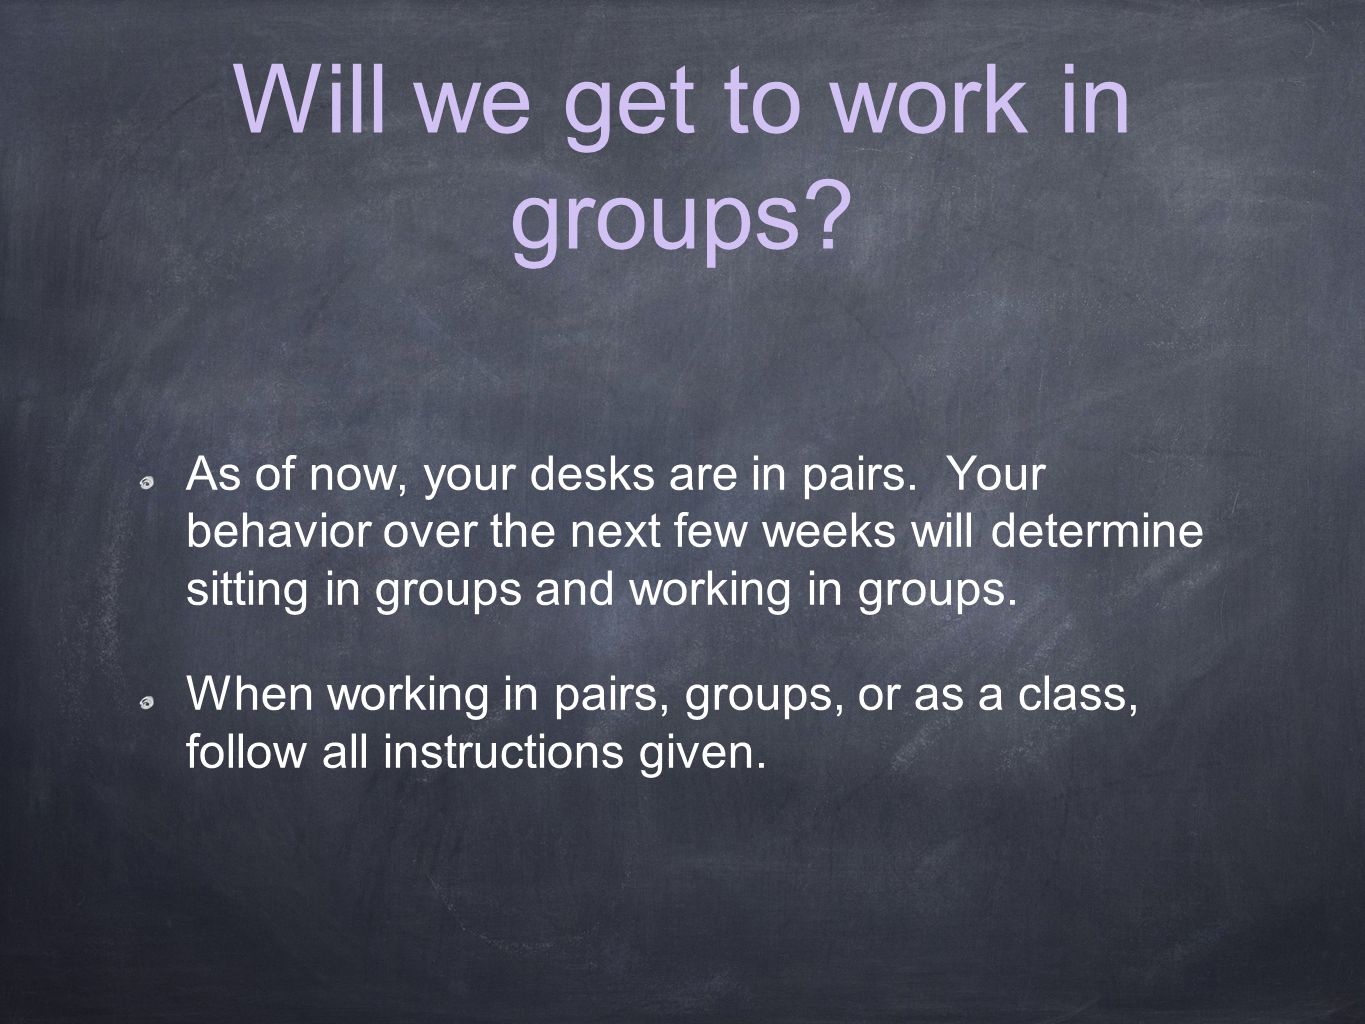 Will we get to work in groups. As of now, your desks are in pairs.